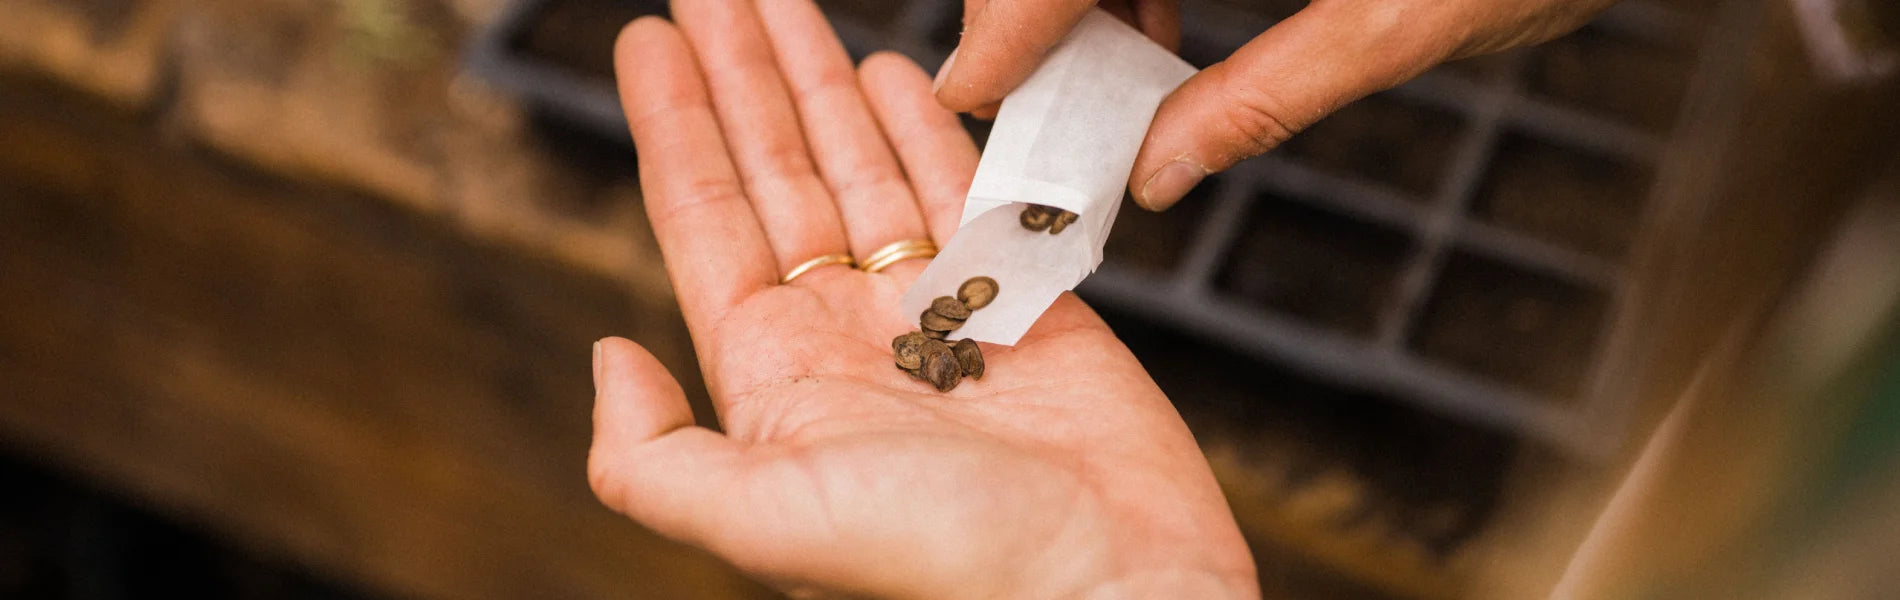 Seeds being poured into a hand